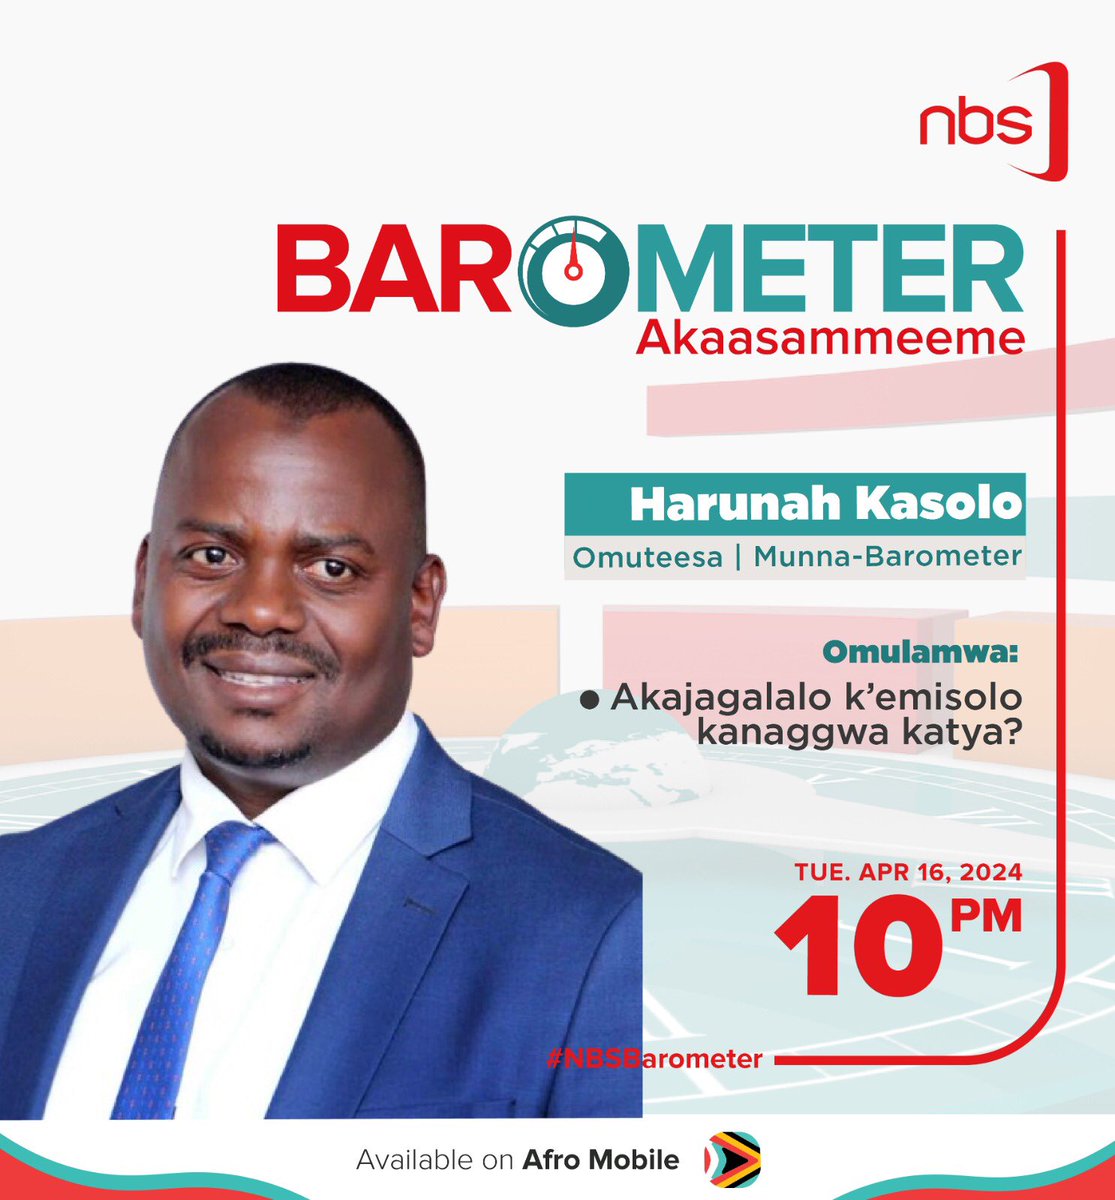 After a brief absence, I'm back on #NBSBarometer! Make sure you tune in tonight, it's going to be an exciting show you won't want to miss.